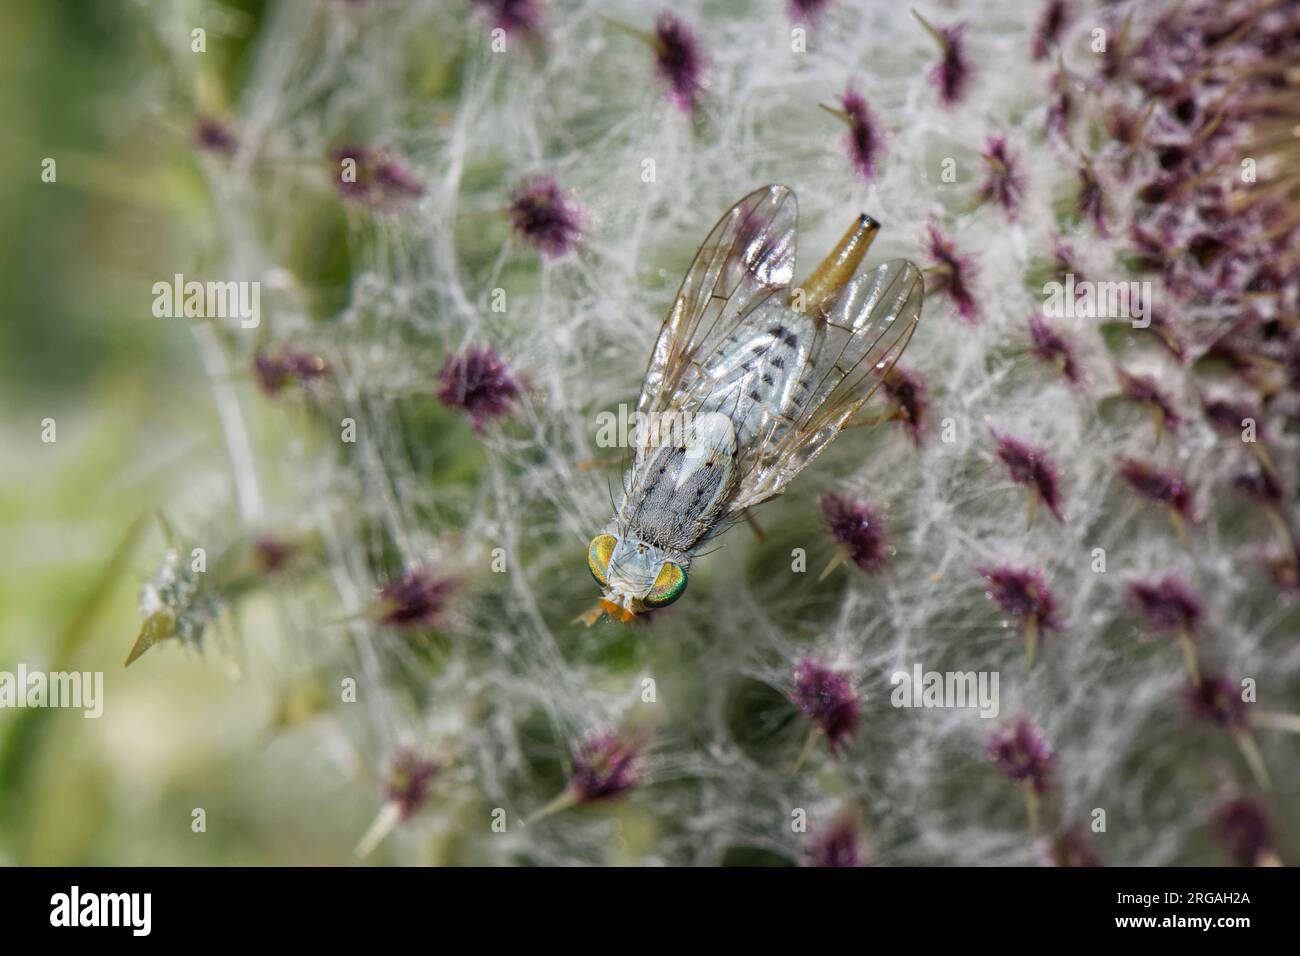 Female Gall fly / Greater fruit fly (Terellia longicauda) on a Woolly thistle (Cirsium eriophorum) flowerhead, the host plant for its larvae, Wilts UK Stock Photo